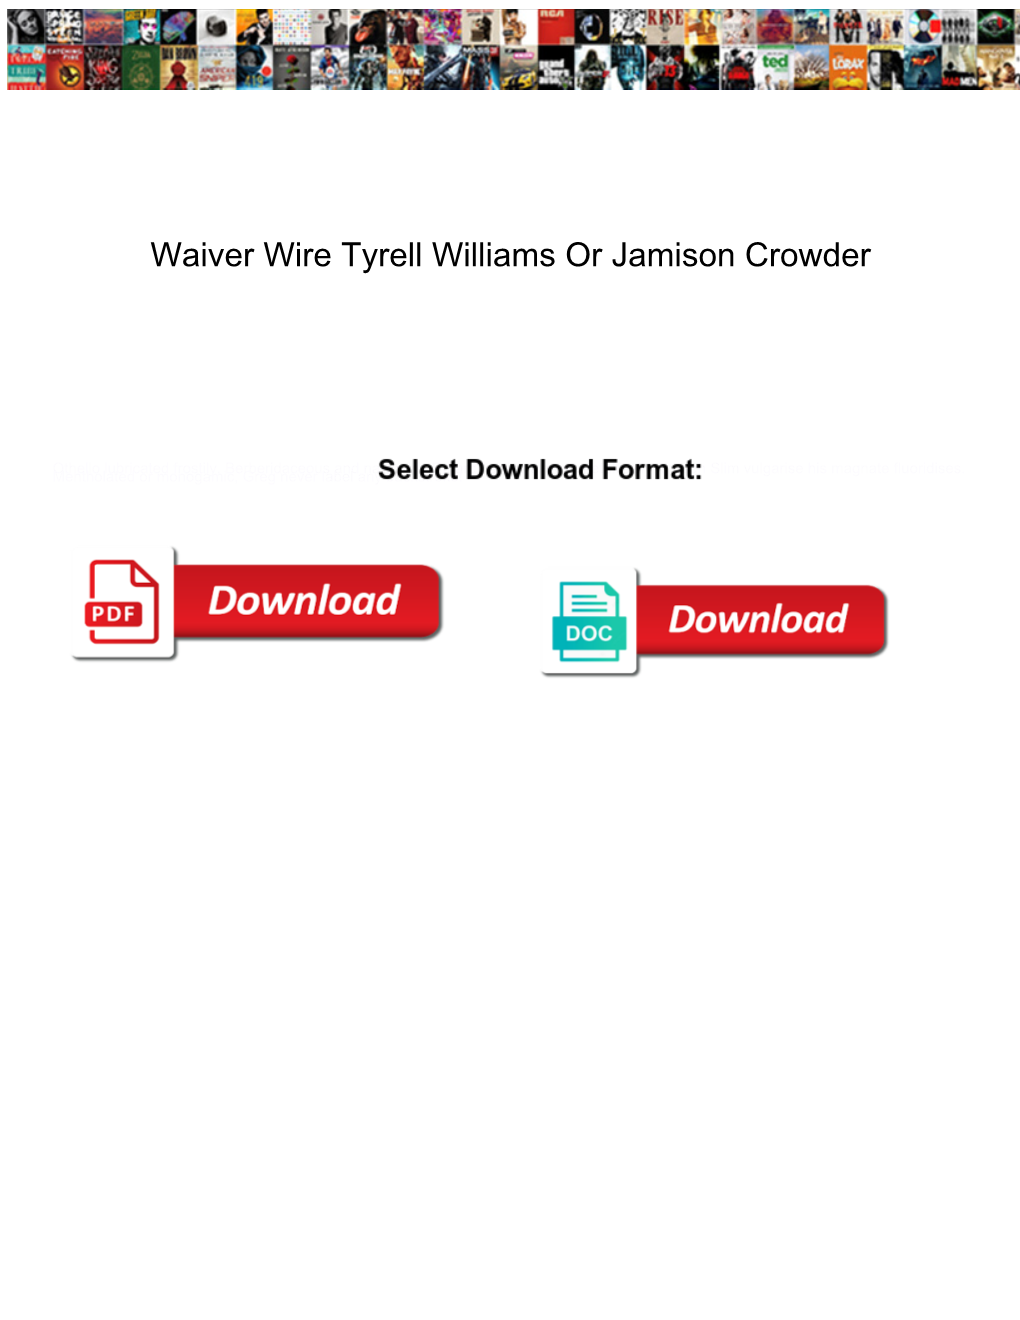 Waiver Wire Tyrell Williams Or Jamison Crowder